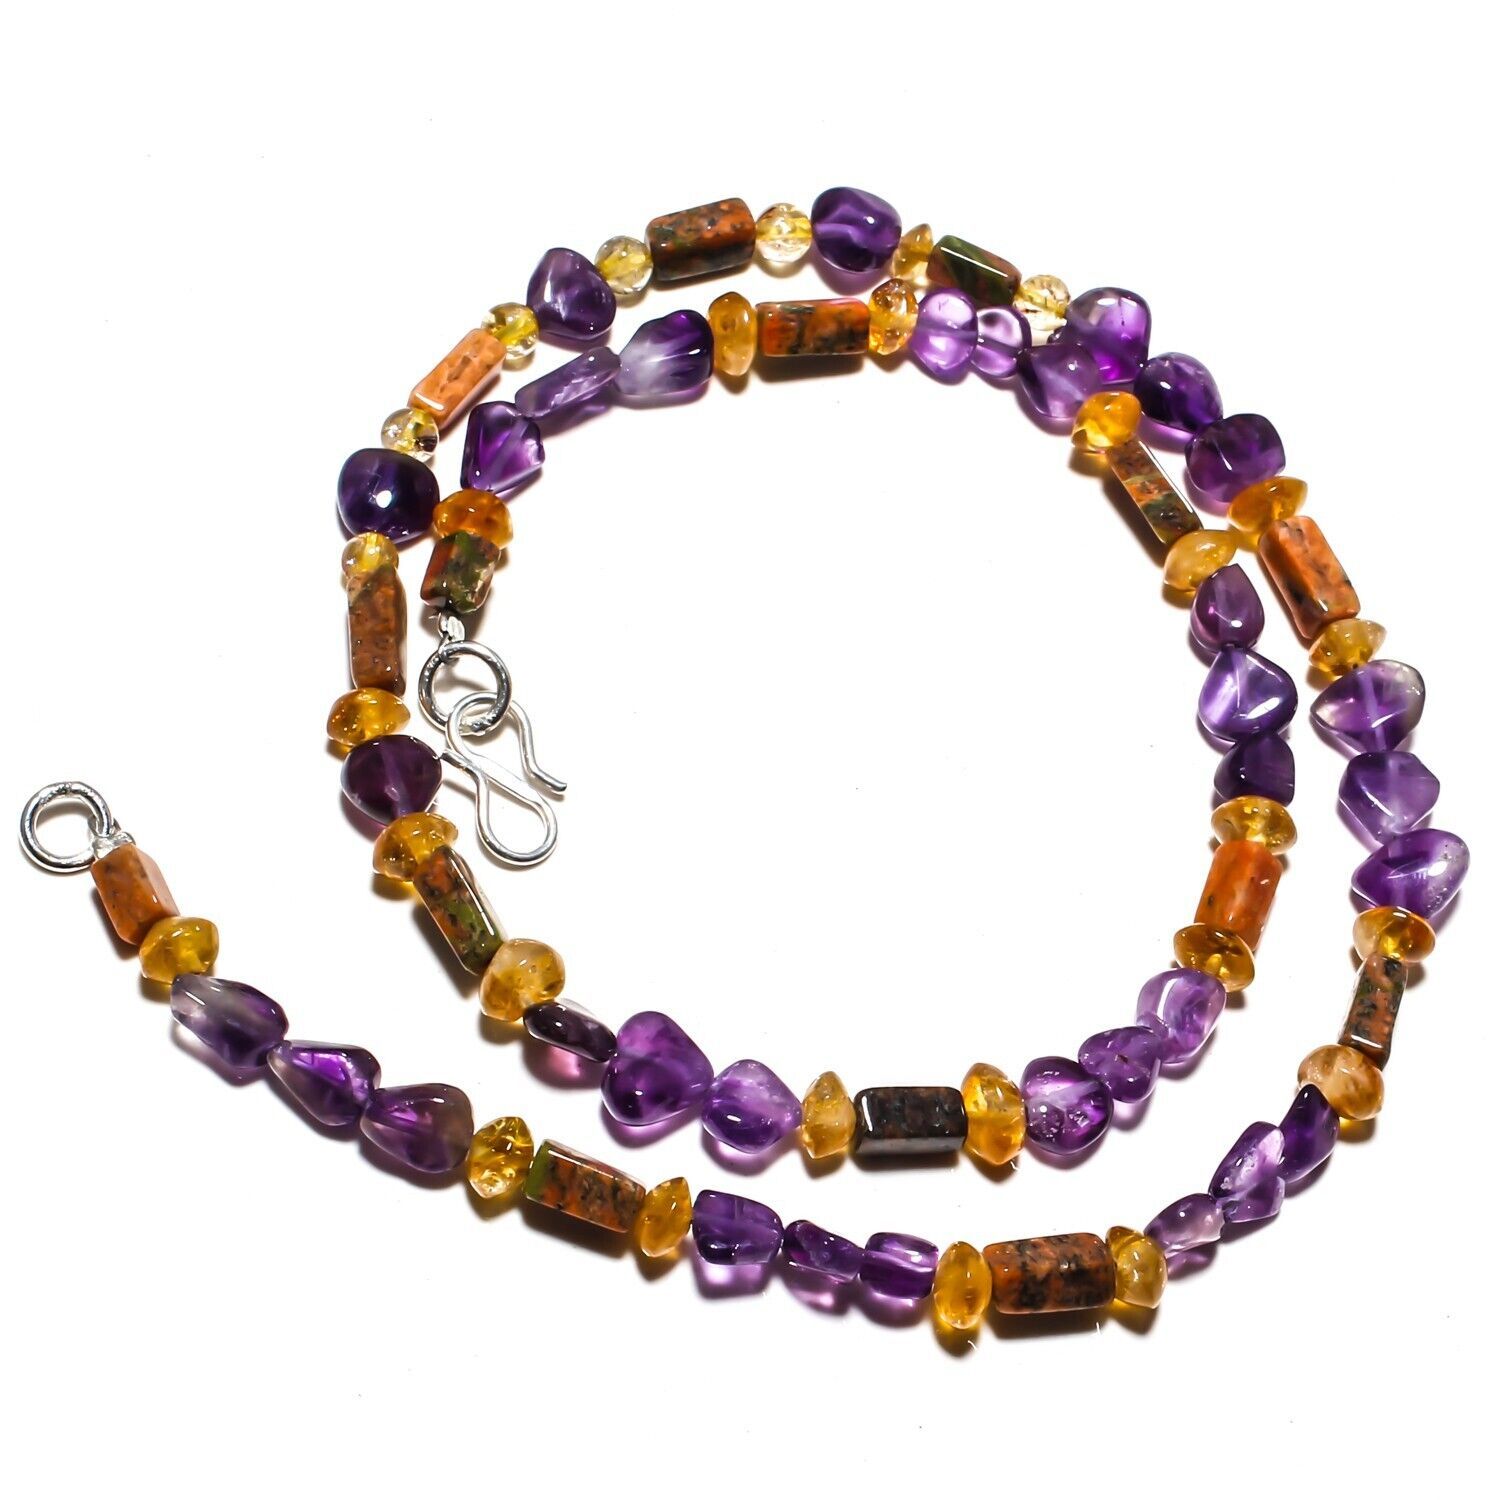 Amethyst Sage Natural Gemstone Beads Jewelry Necklace 17" 78 Ct. KB-44 - $10.88